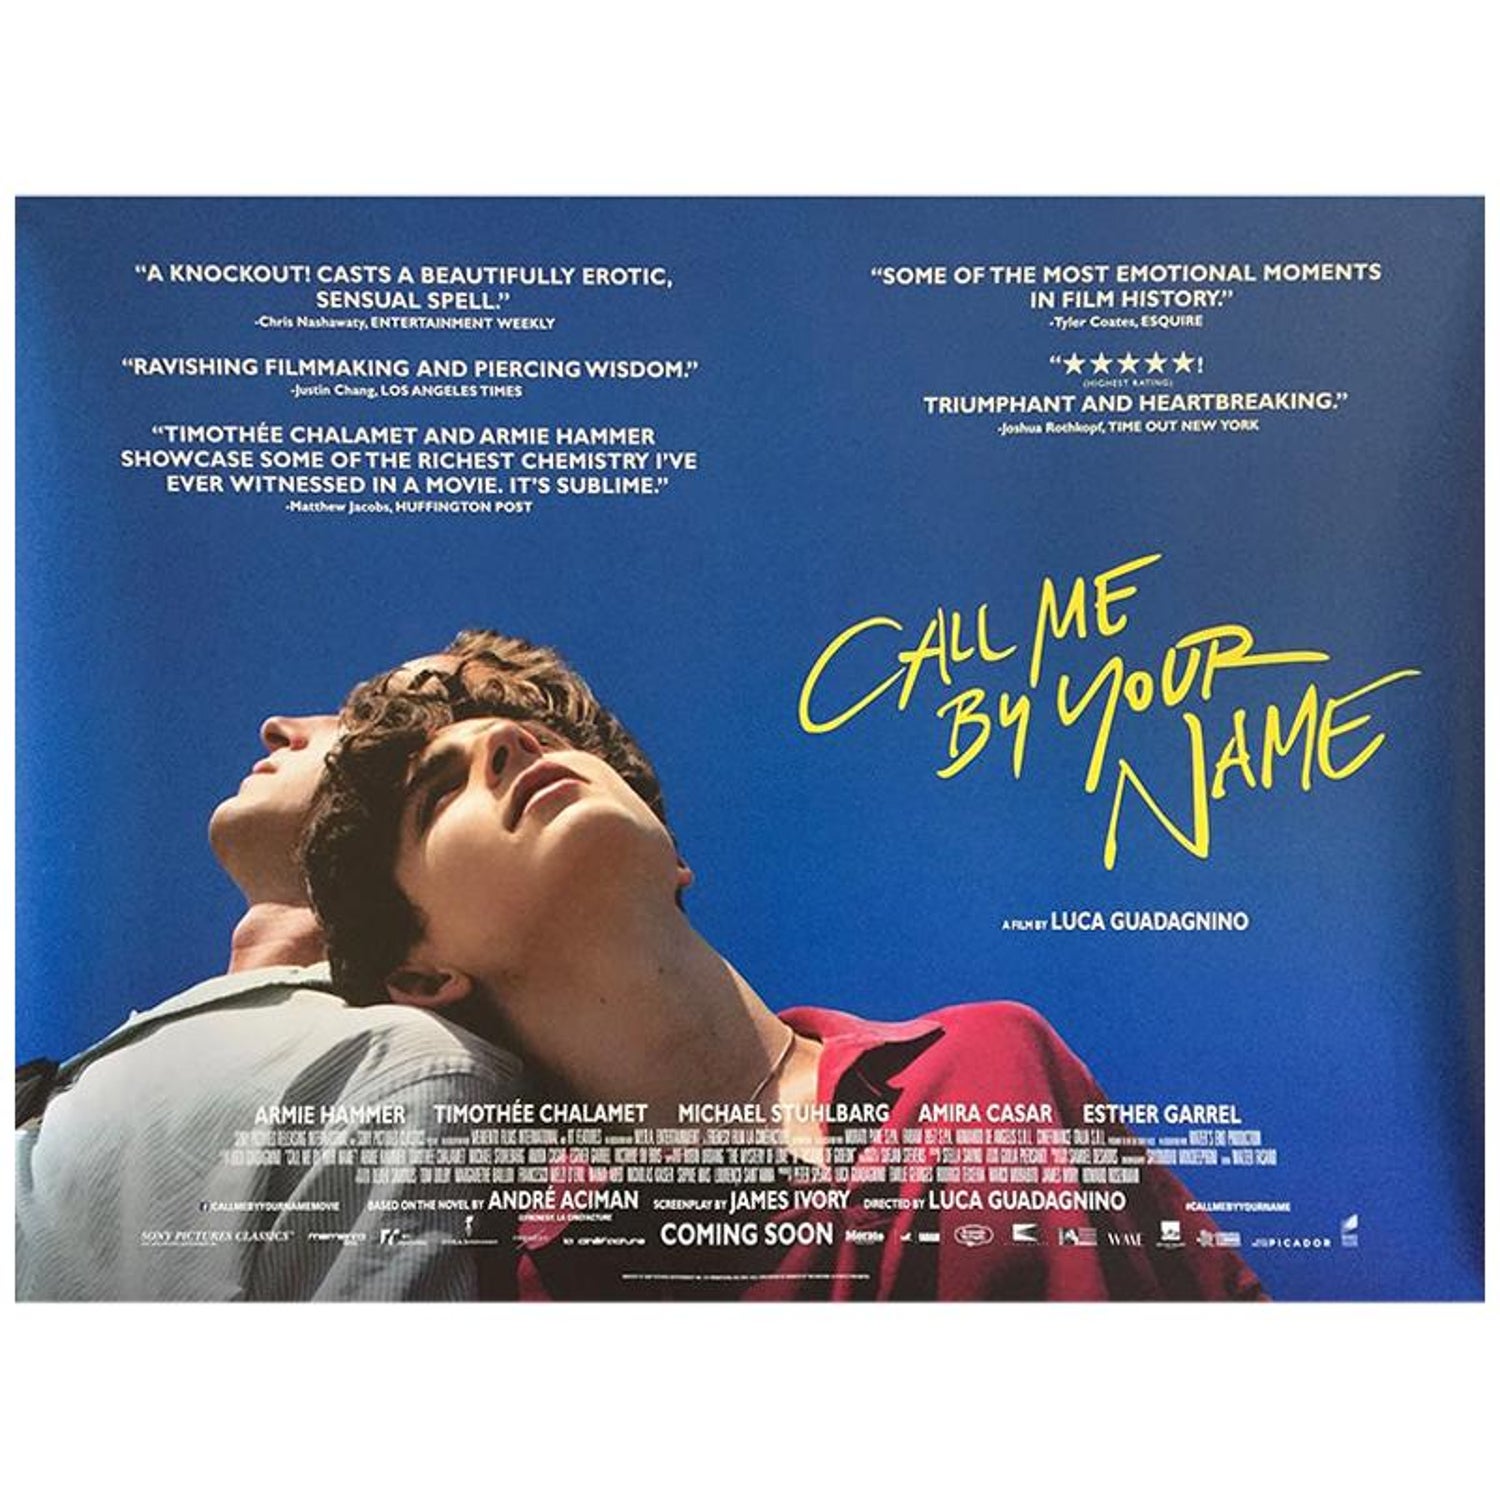 Call Me By Your Name 17 Poster For Sale At 1stdibs Call Me By Your Name Poster Hd Call Me By Your Name Movie Poster Call Me By Your Name Posters